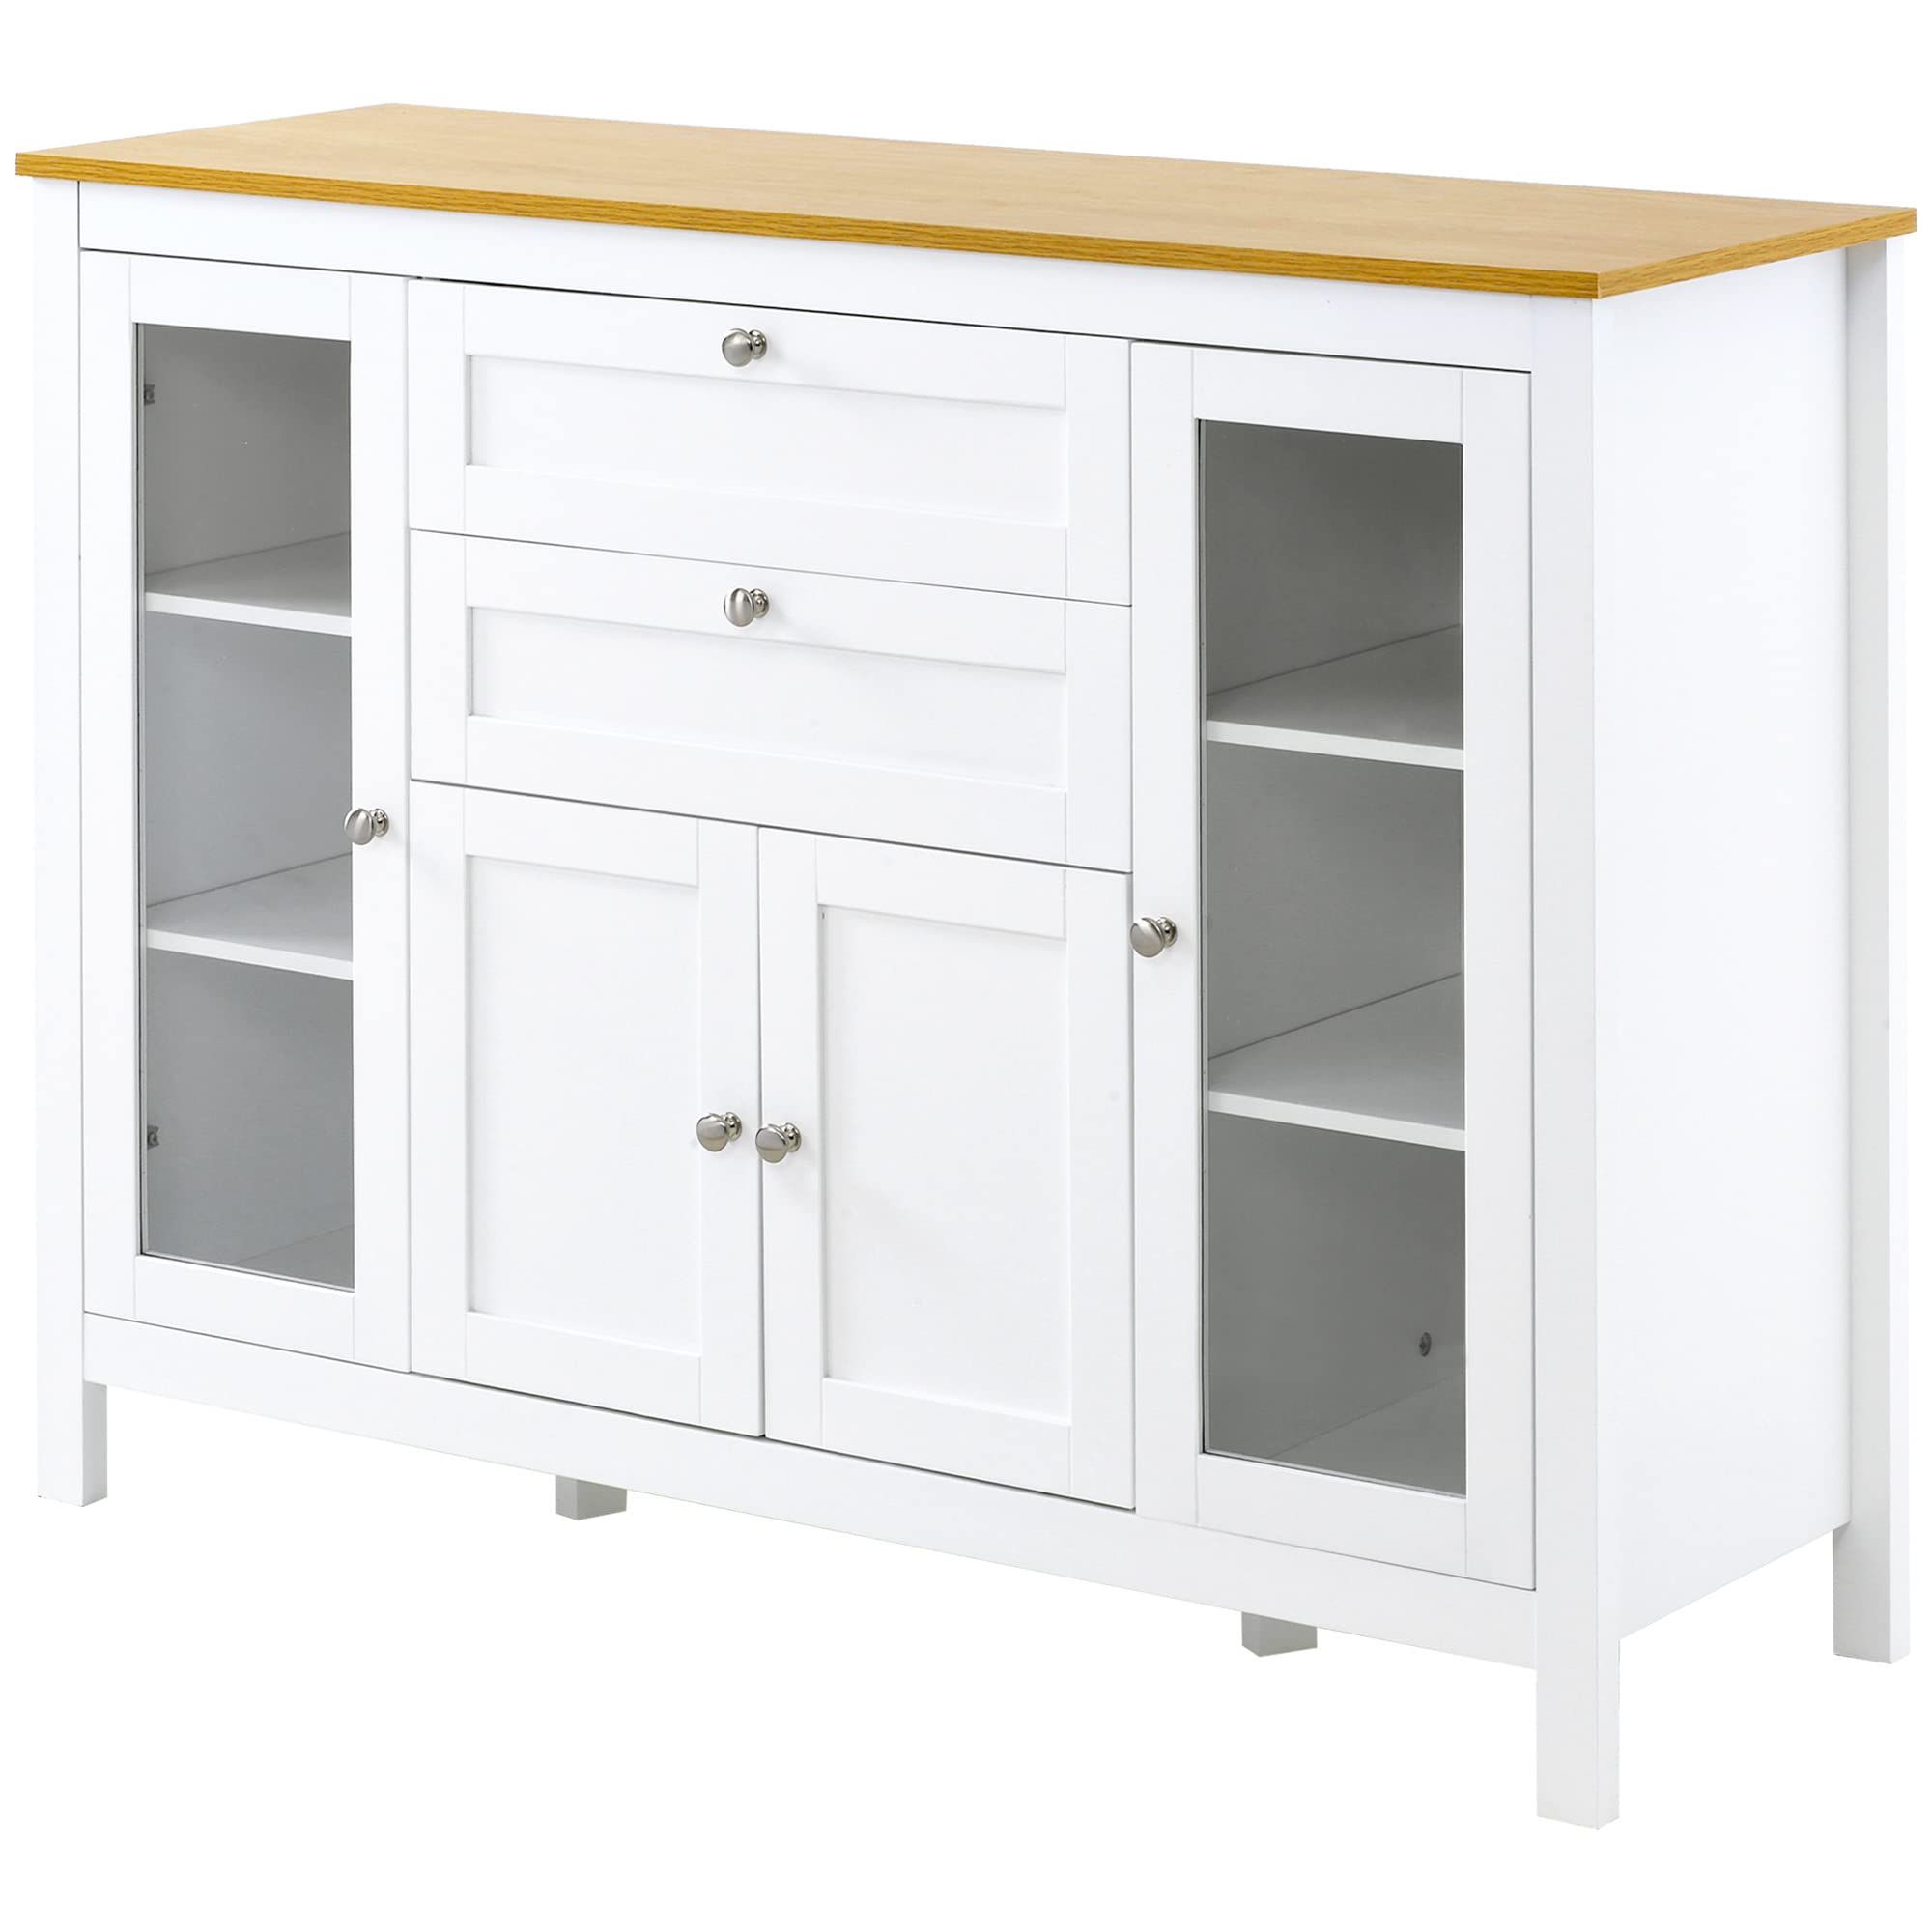 Sideboards With Rubberwood Top With Regard To Most Popular Amazon – Homcom 47" Sideboard, Buffet Cabinet With Rubber Wood Top,  Glass Door, Coffee Bar Cabinet, Kitchen Cabinet With Drawers, Adjustable  Shelving For Living Room, White – Buffets & Sideboards (View 5 of 10)